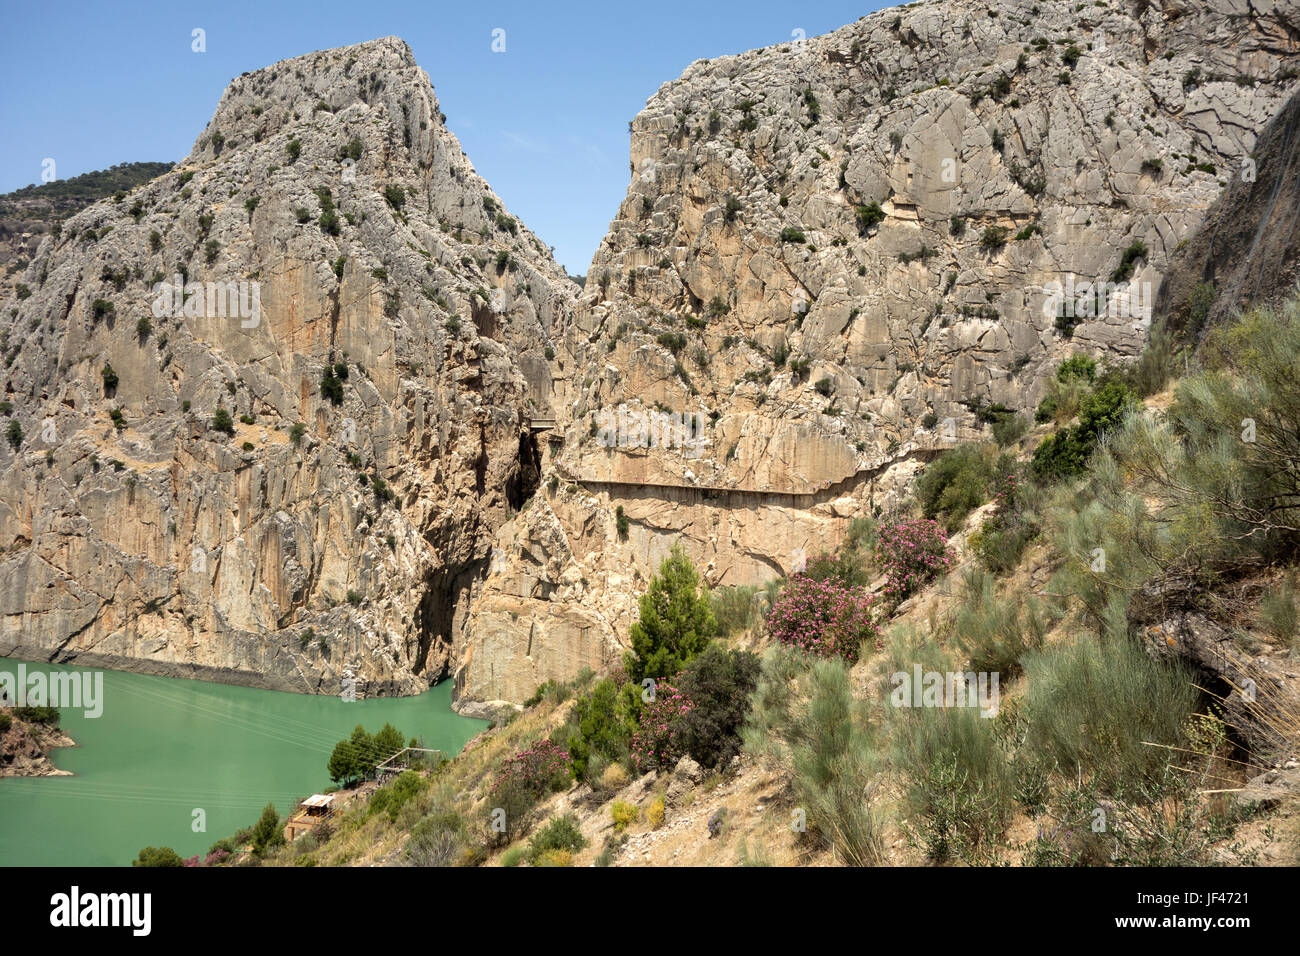 The Spanish Caminito del Rey tourist attraction, Malaga Province with high walkway around a gorge with the Rio Guadalhorce running through it. Stock Photo